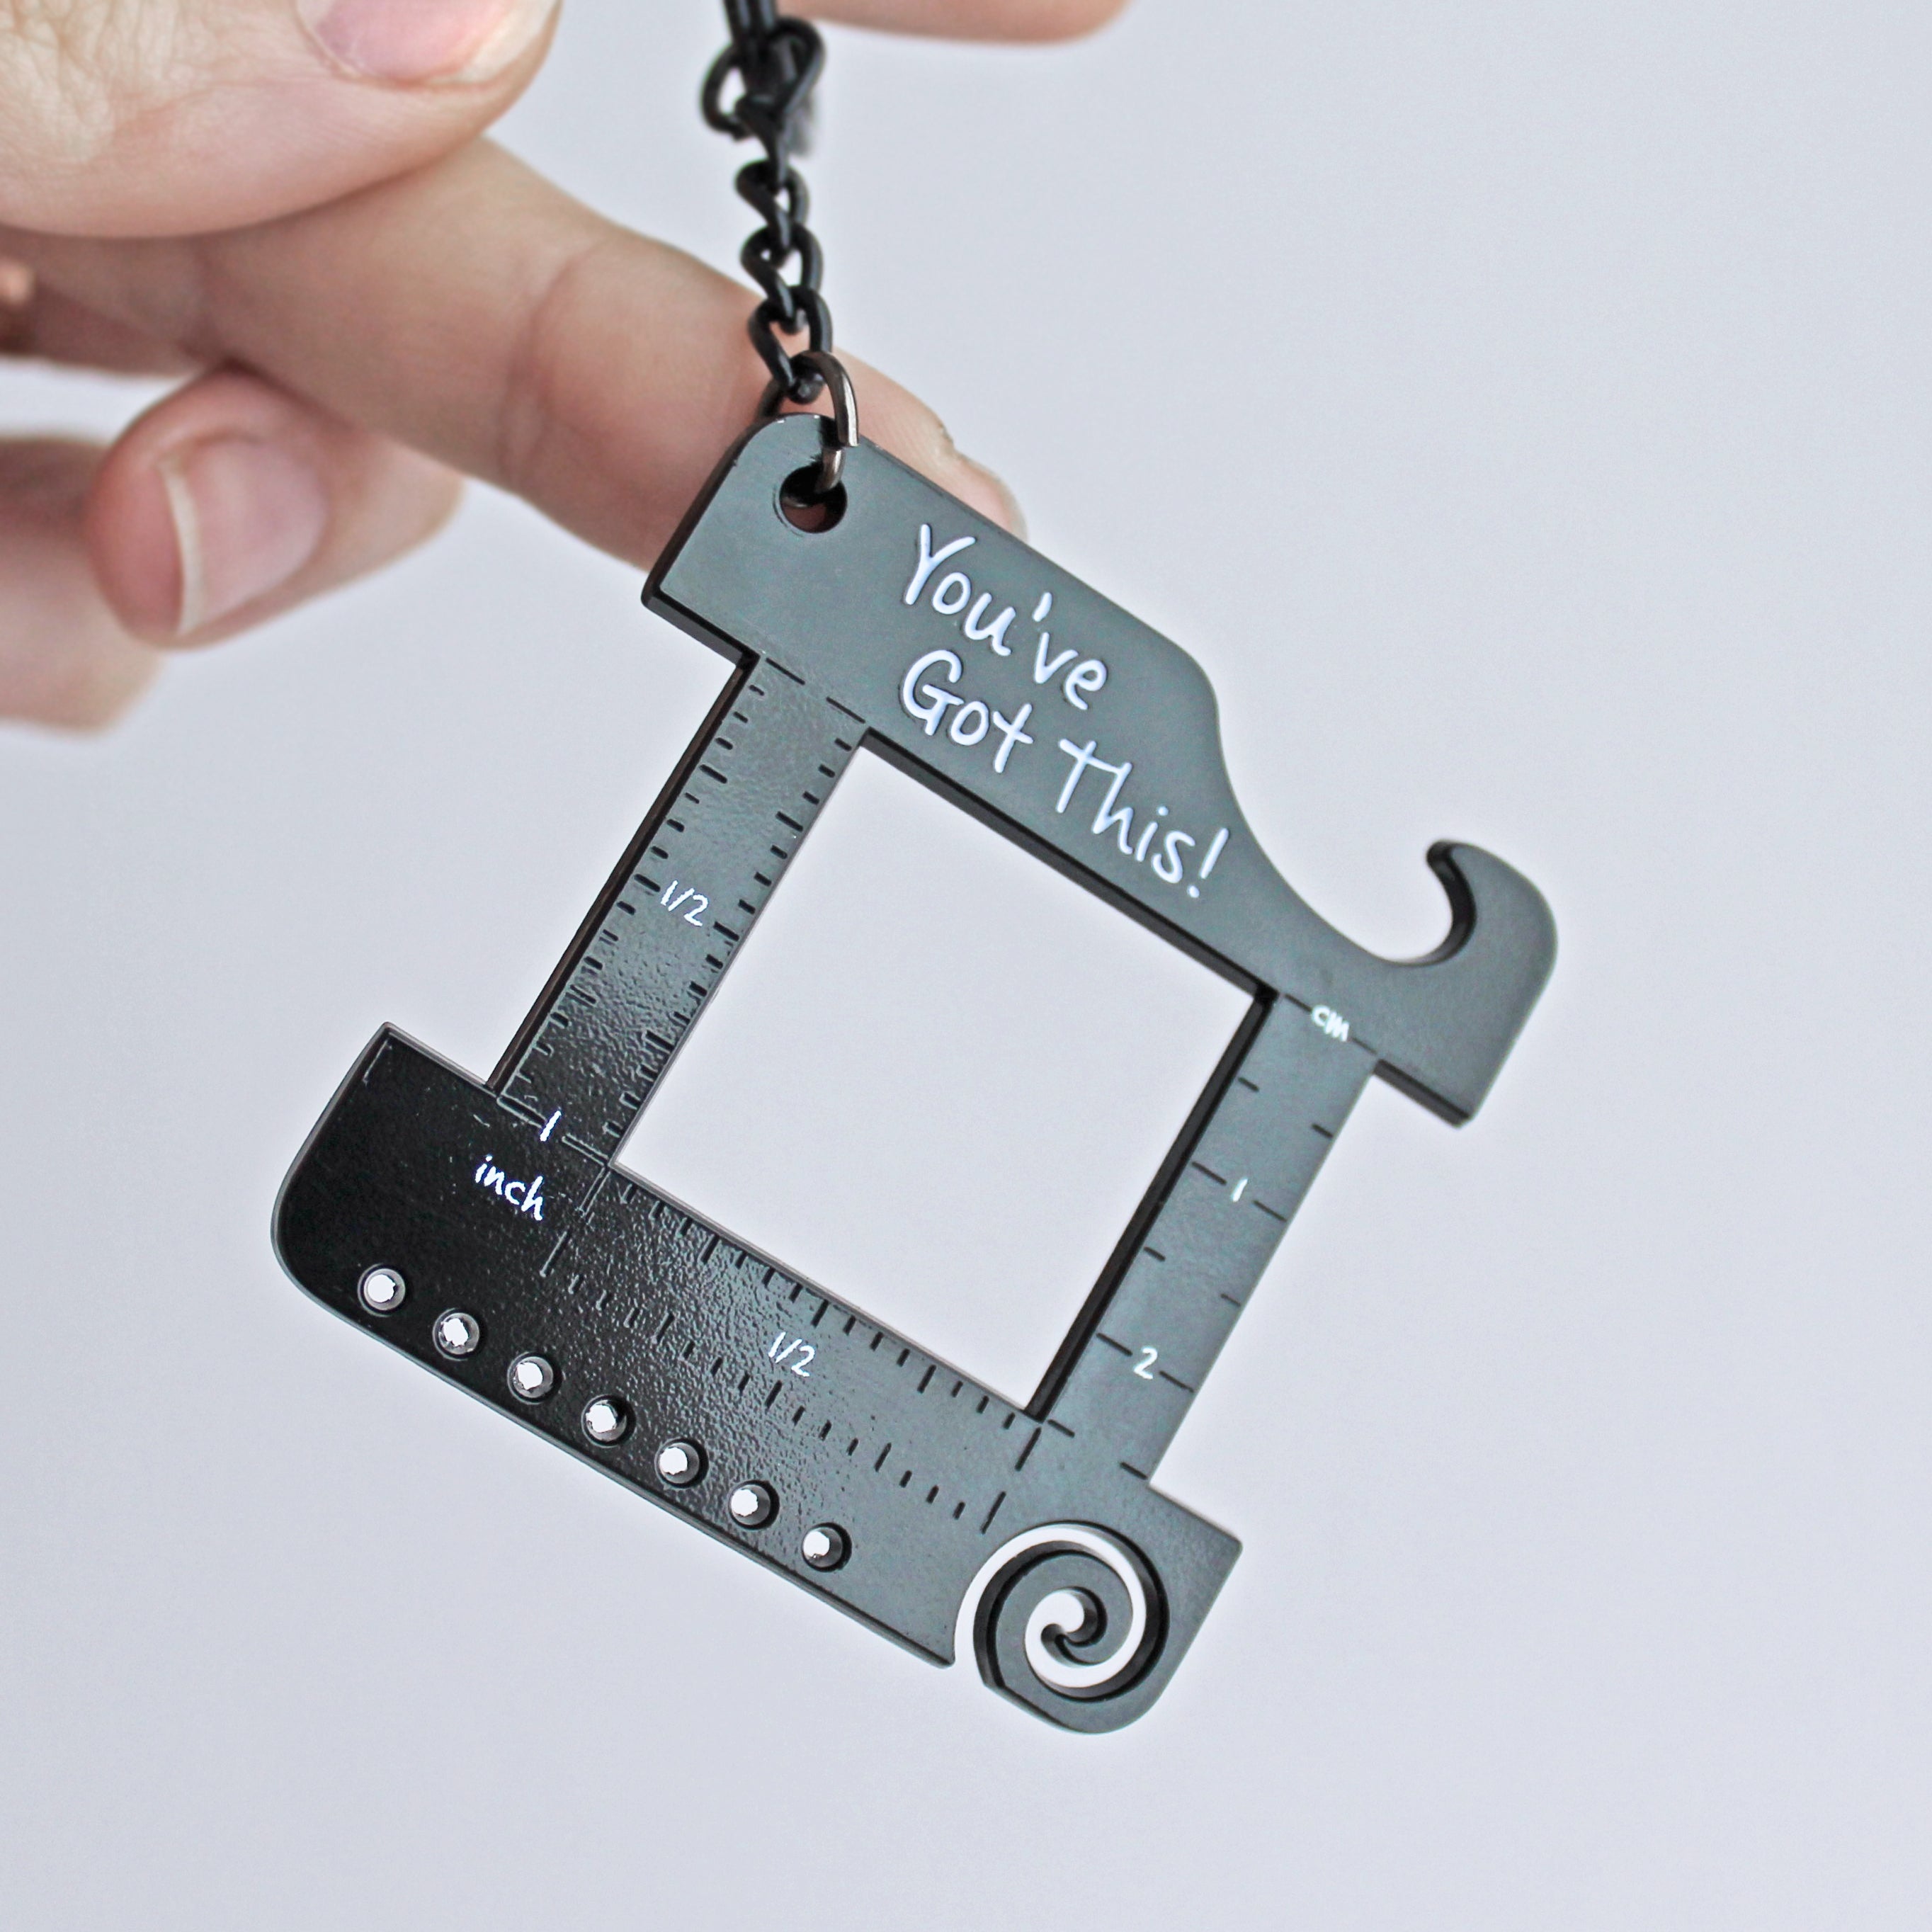 Matte Black 'You've Got this!' Keychain Multi Tool